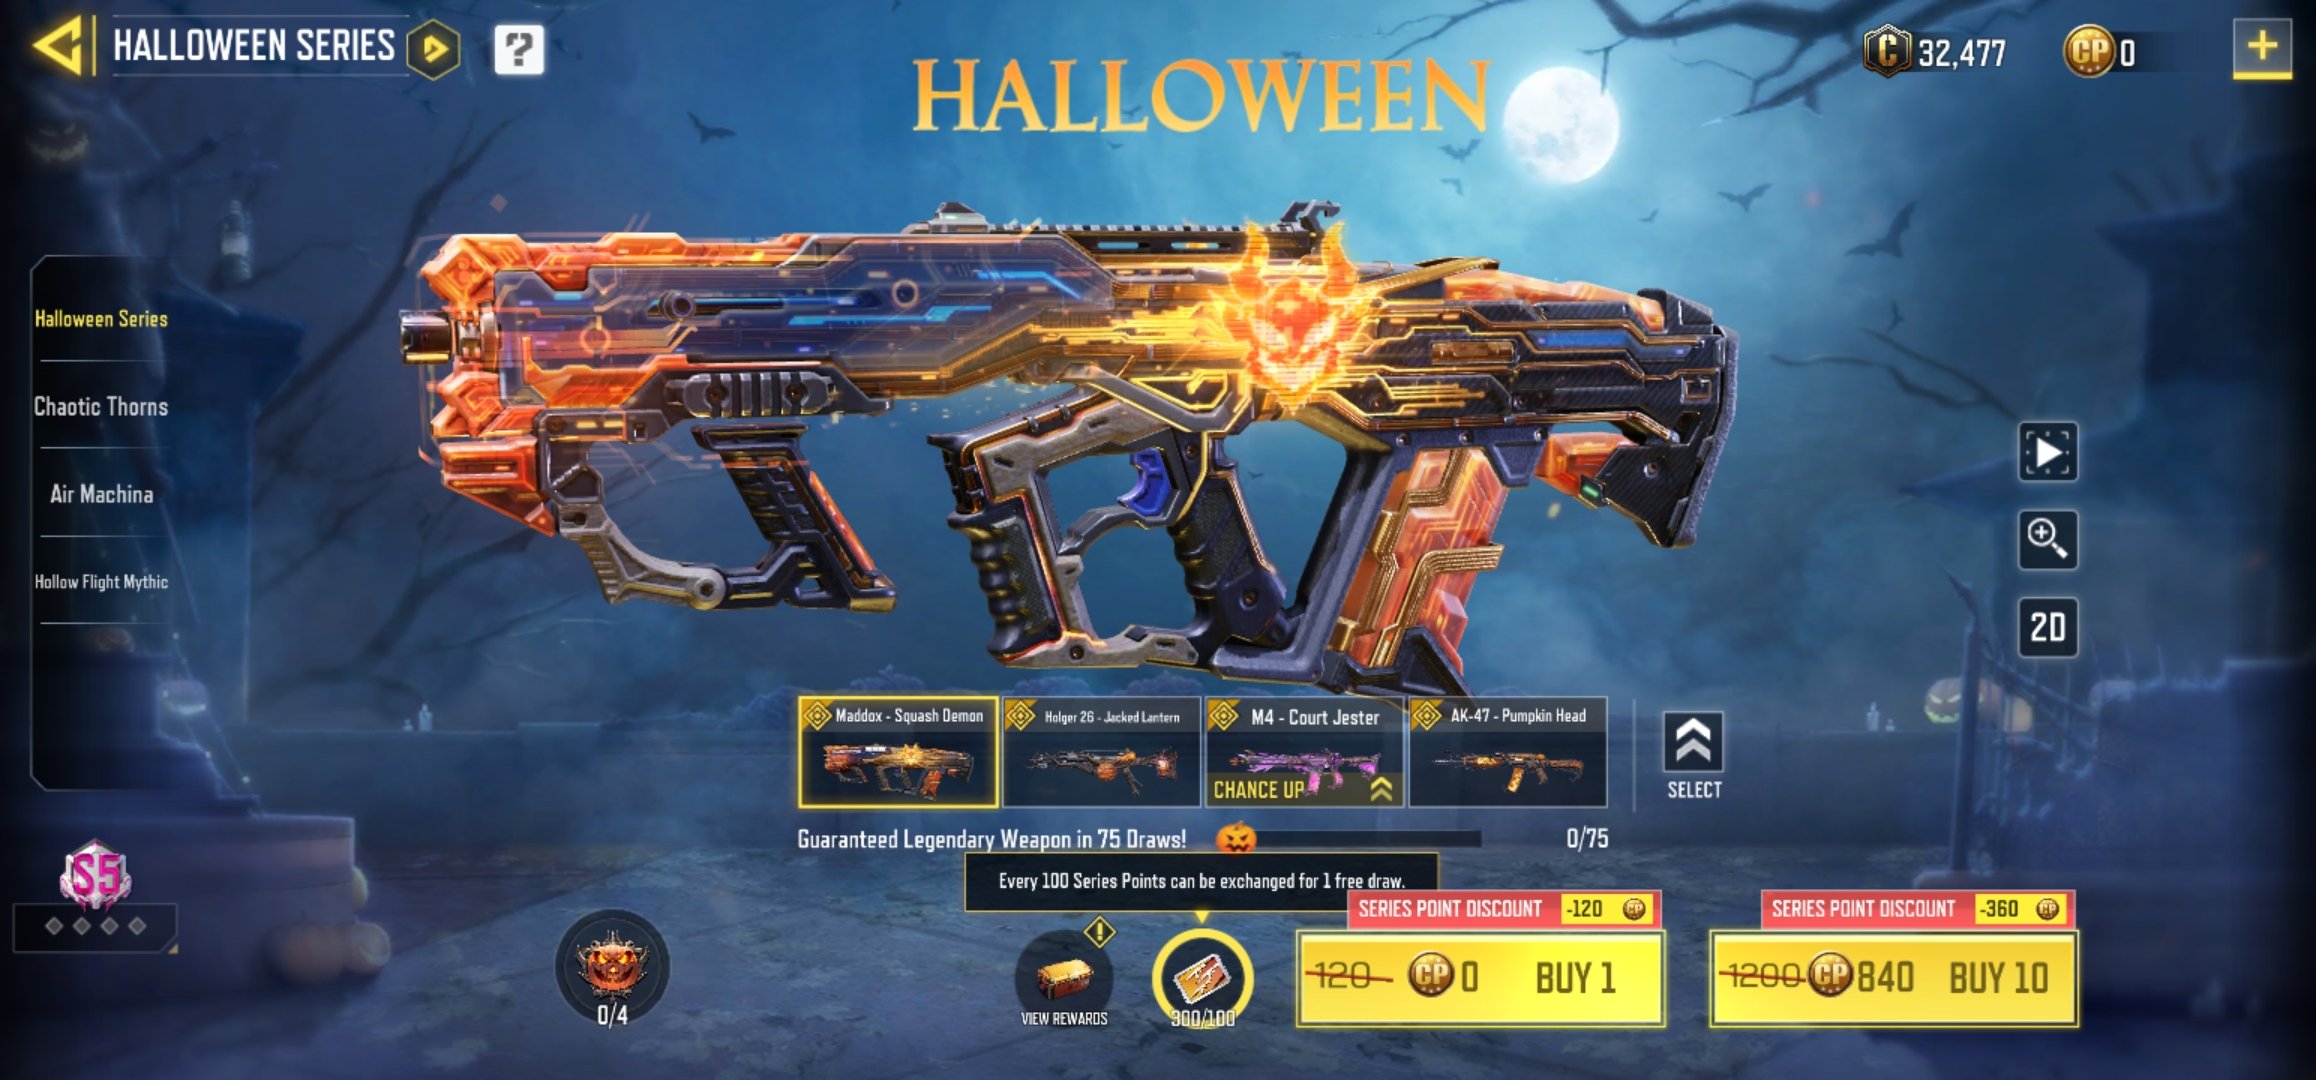 Call of Duty®: Mobile - Halloween Series Armory 